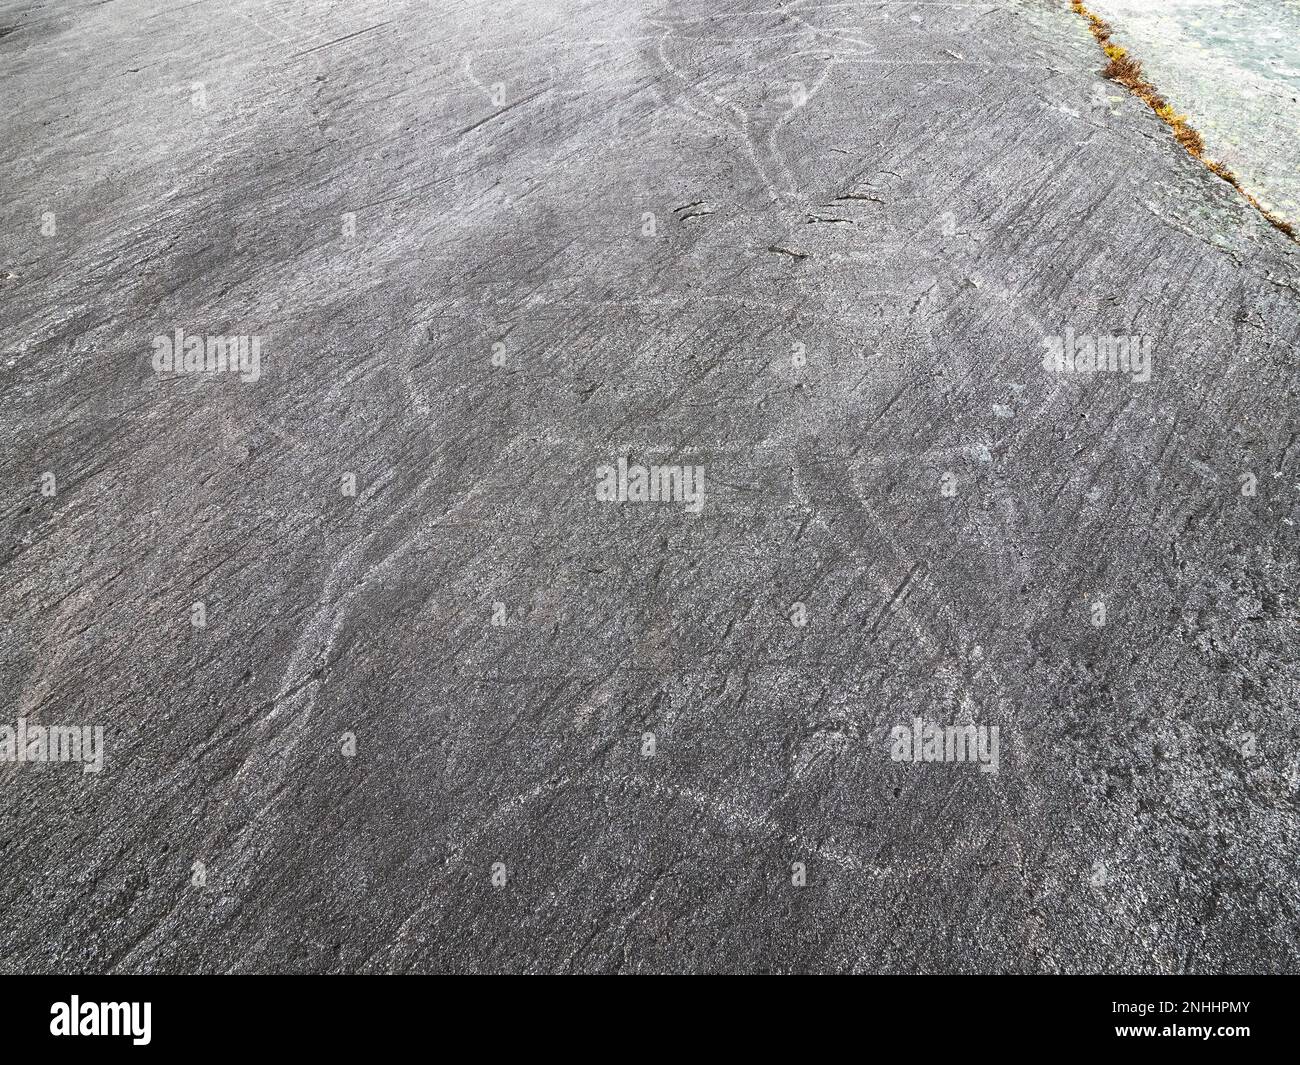 Prehistoric rock carvings, petroglyphs, at Leiknes, showing scenes from hunting, Norway. Stock Photo